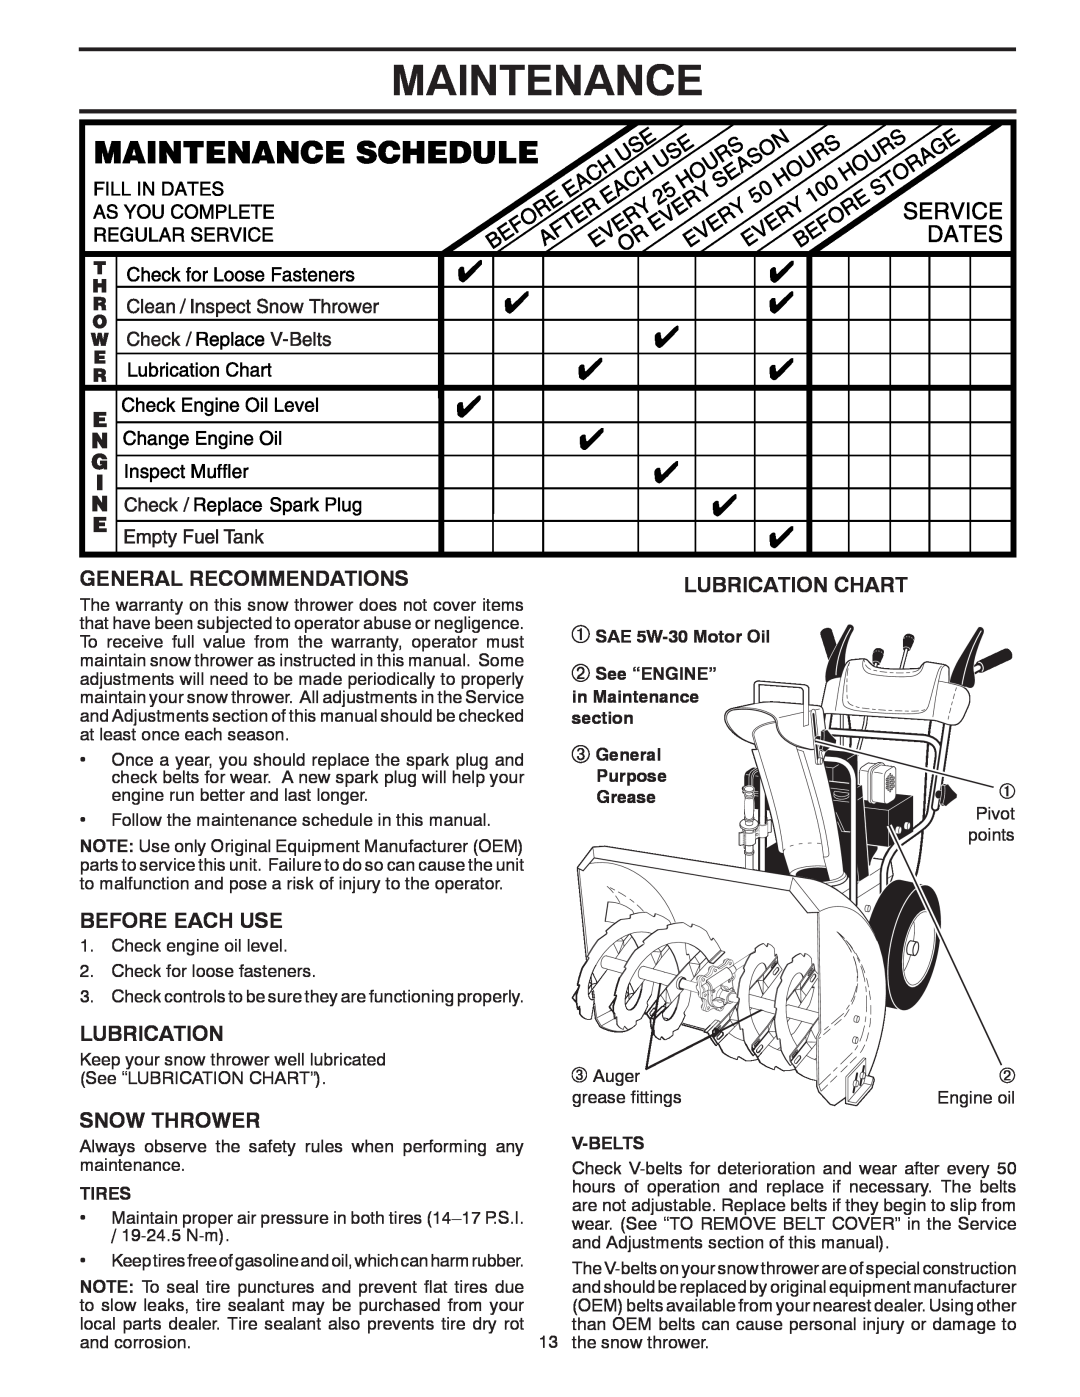 Poulan 96192001800 Maintenance, General Recommendations, Before Each Use, Snow Thrower, Lubrication Chart, Tires 